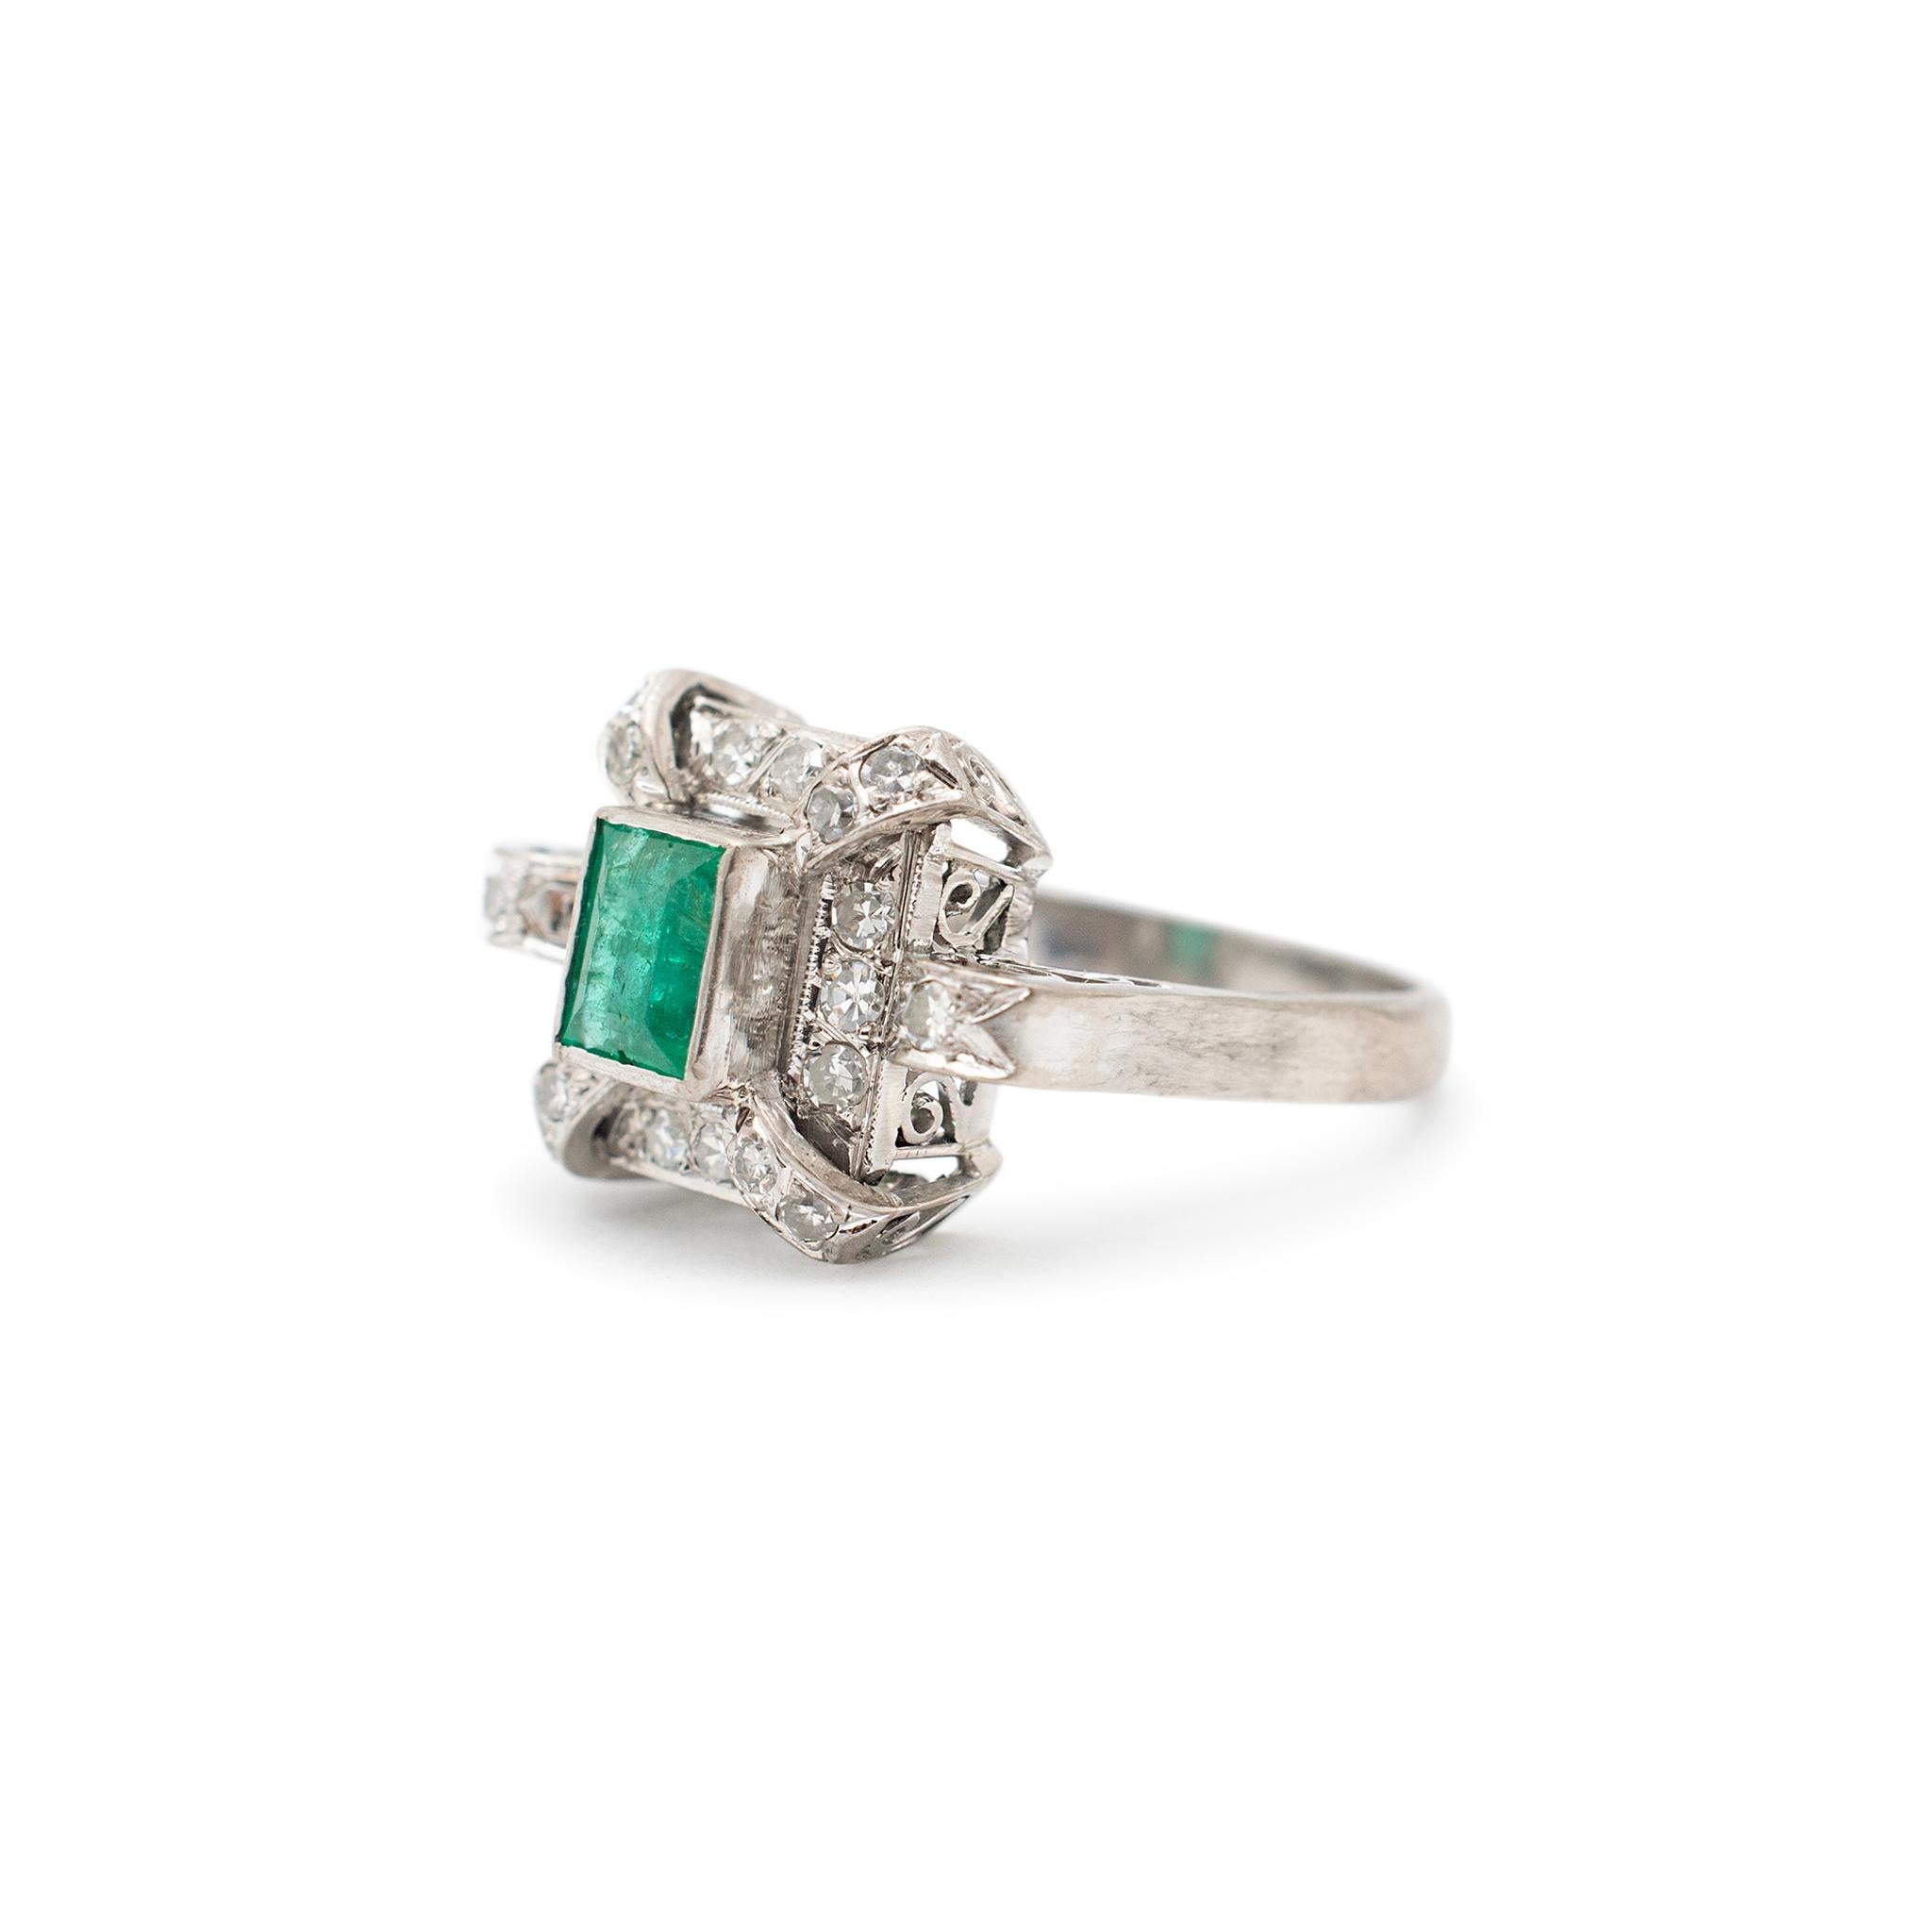 Single Cut Antique Mixed Metals Gold Silver Palladium Emerald Halo Diamond Cocktail Ring For Sale